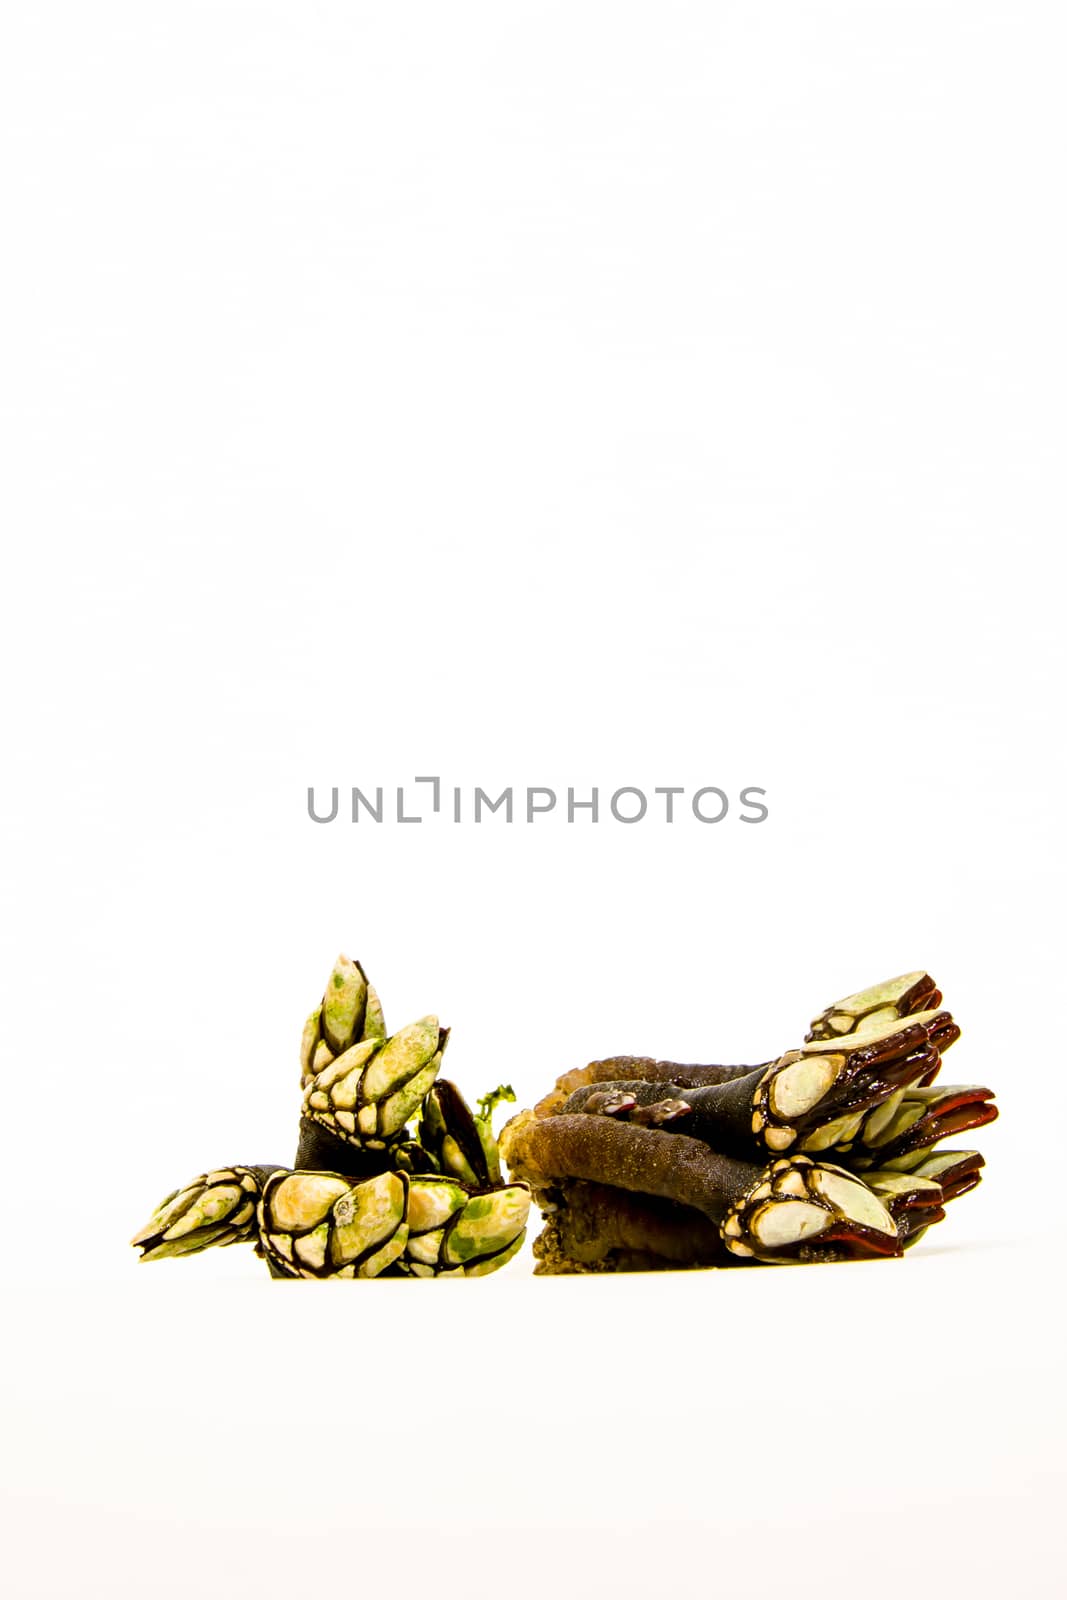 Group of barnacles seafood on a white background